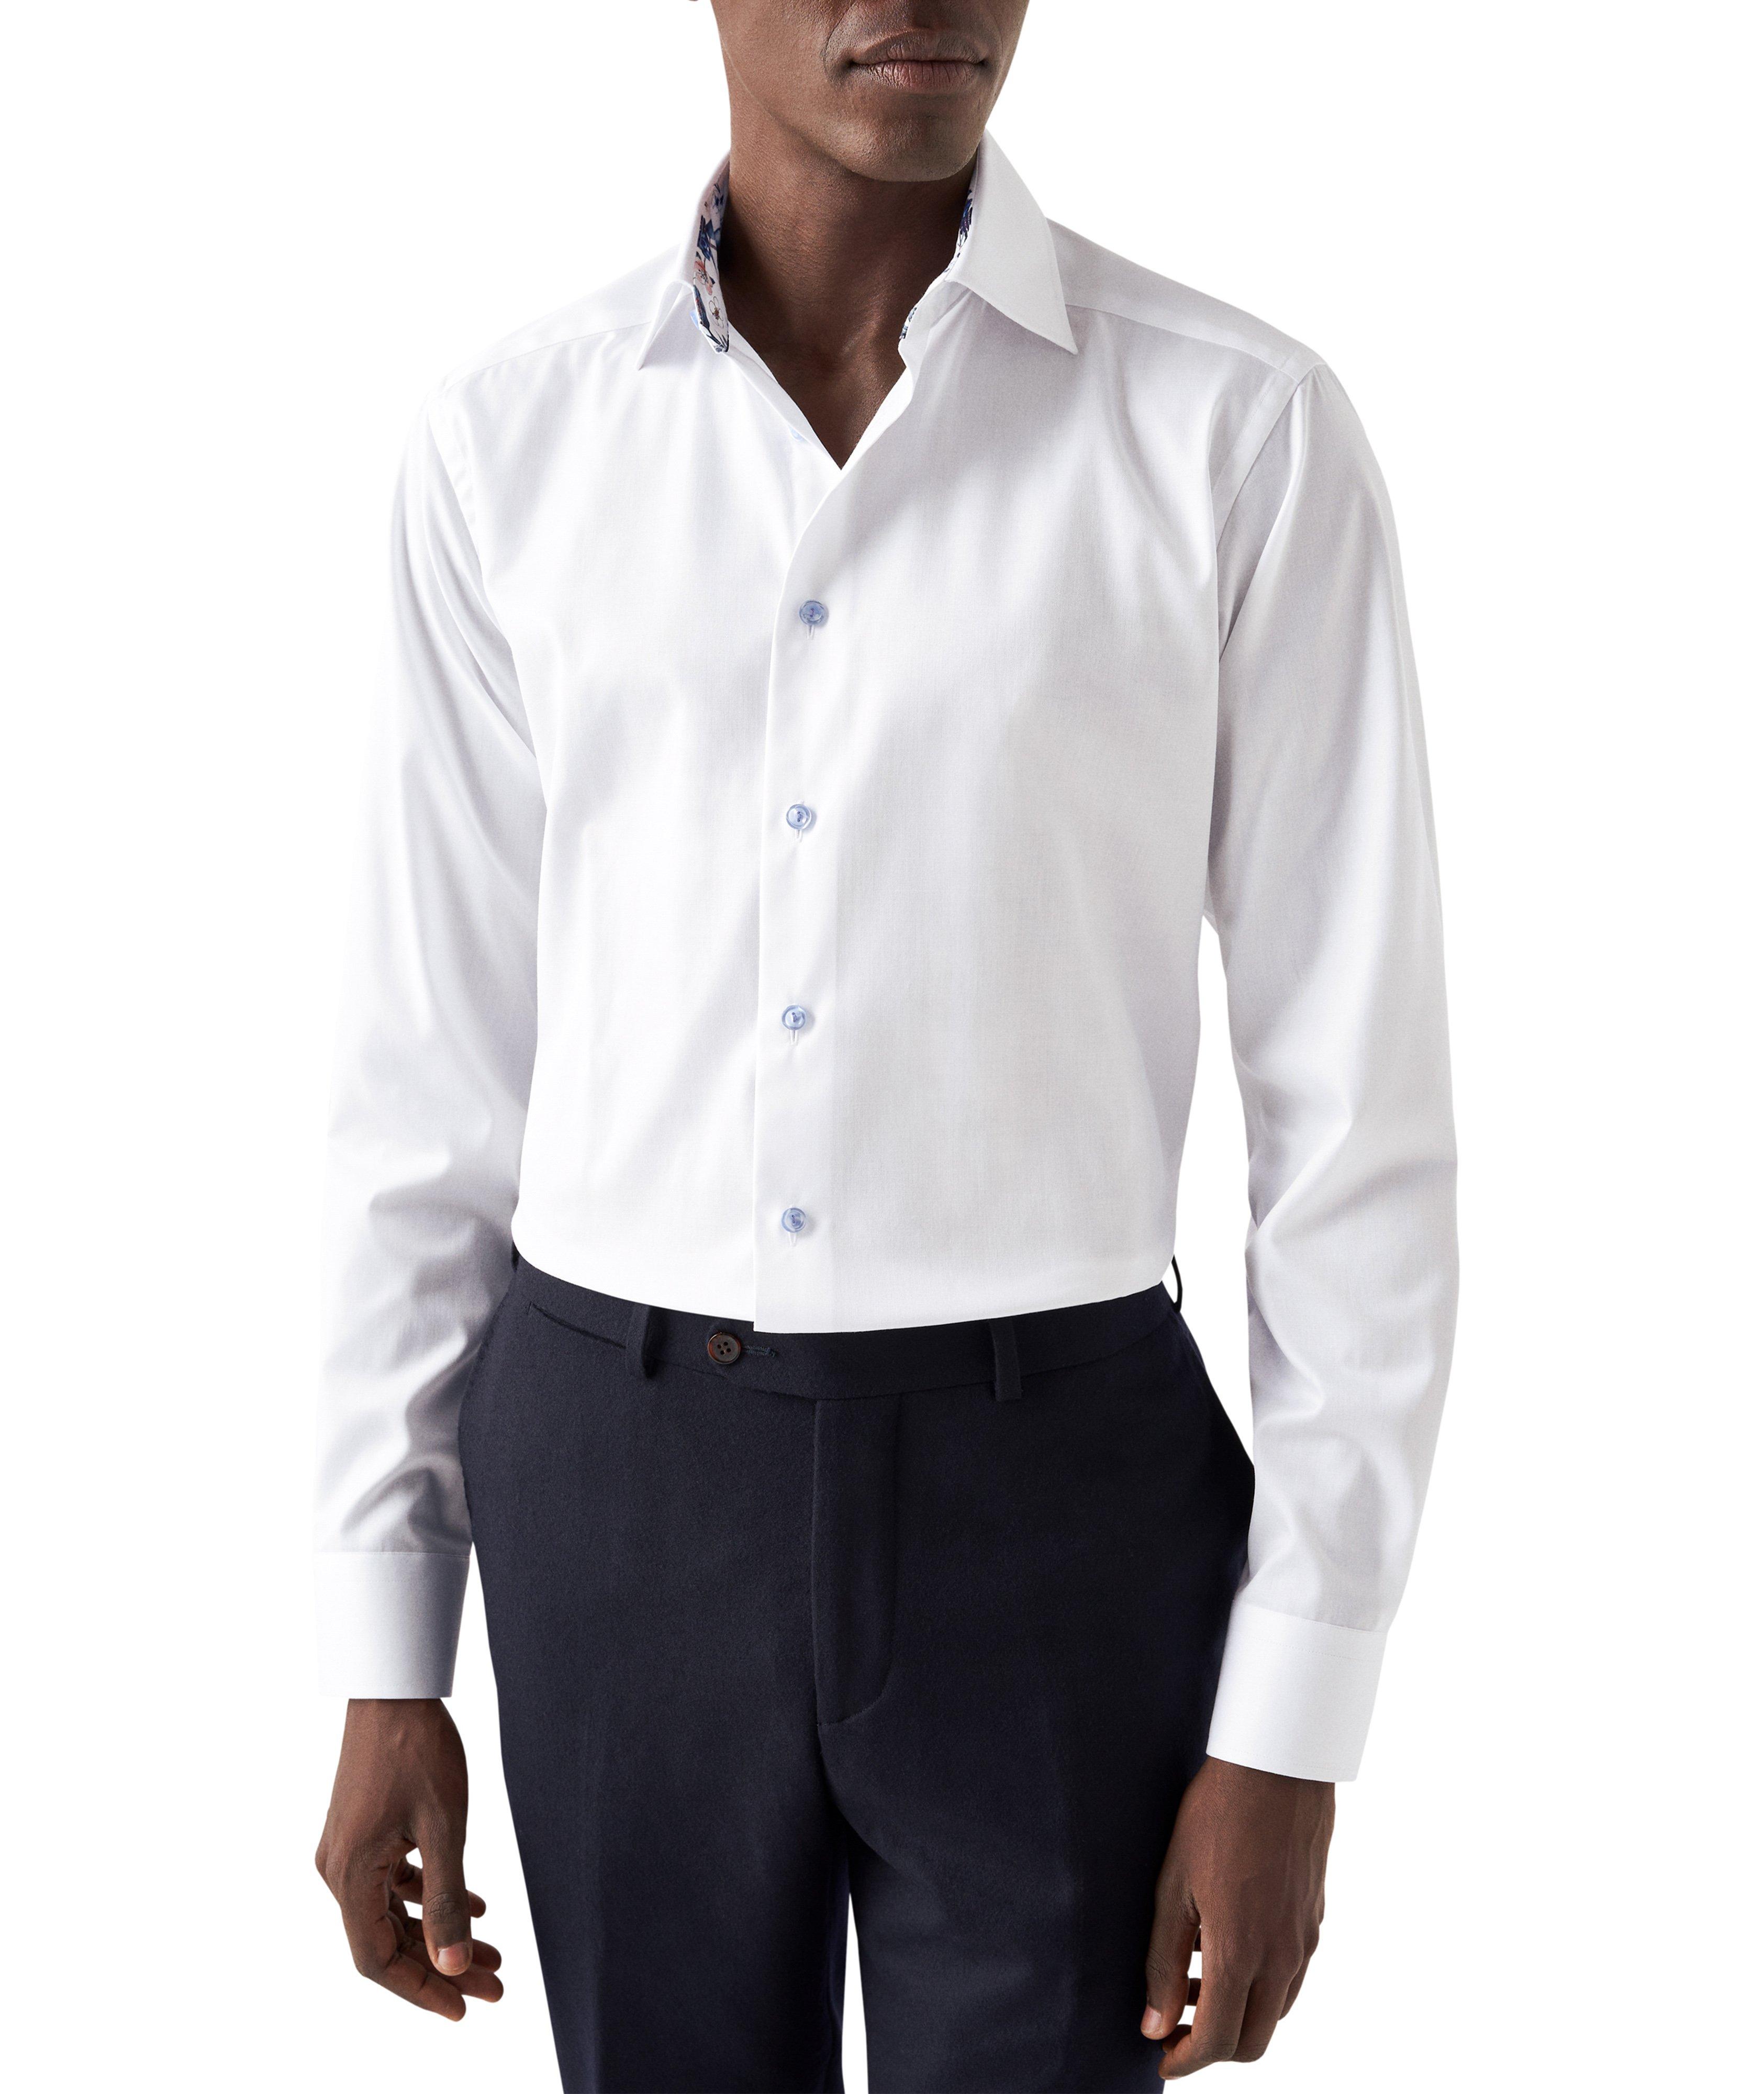 Contemporary Fit Twill Shirt with Geometric Contrast Details image 1